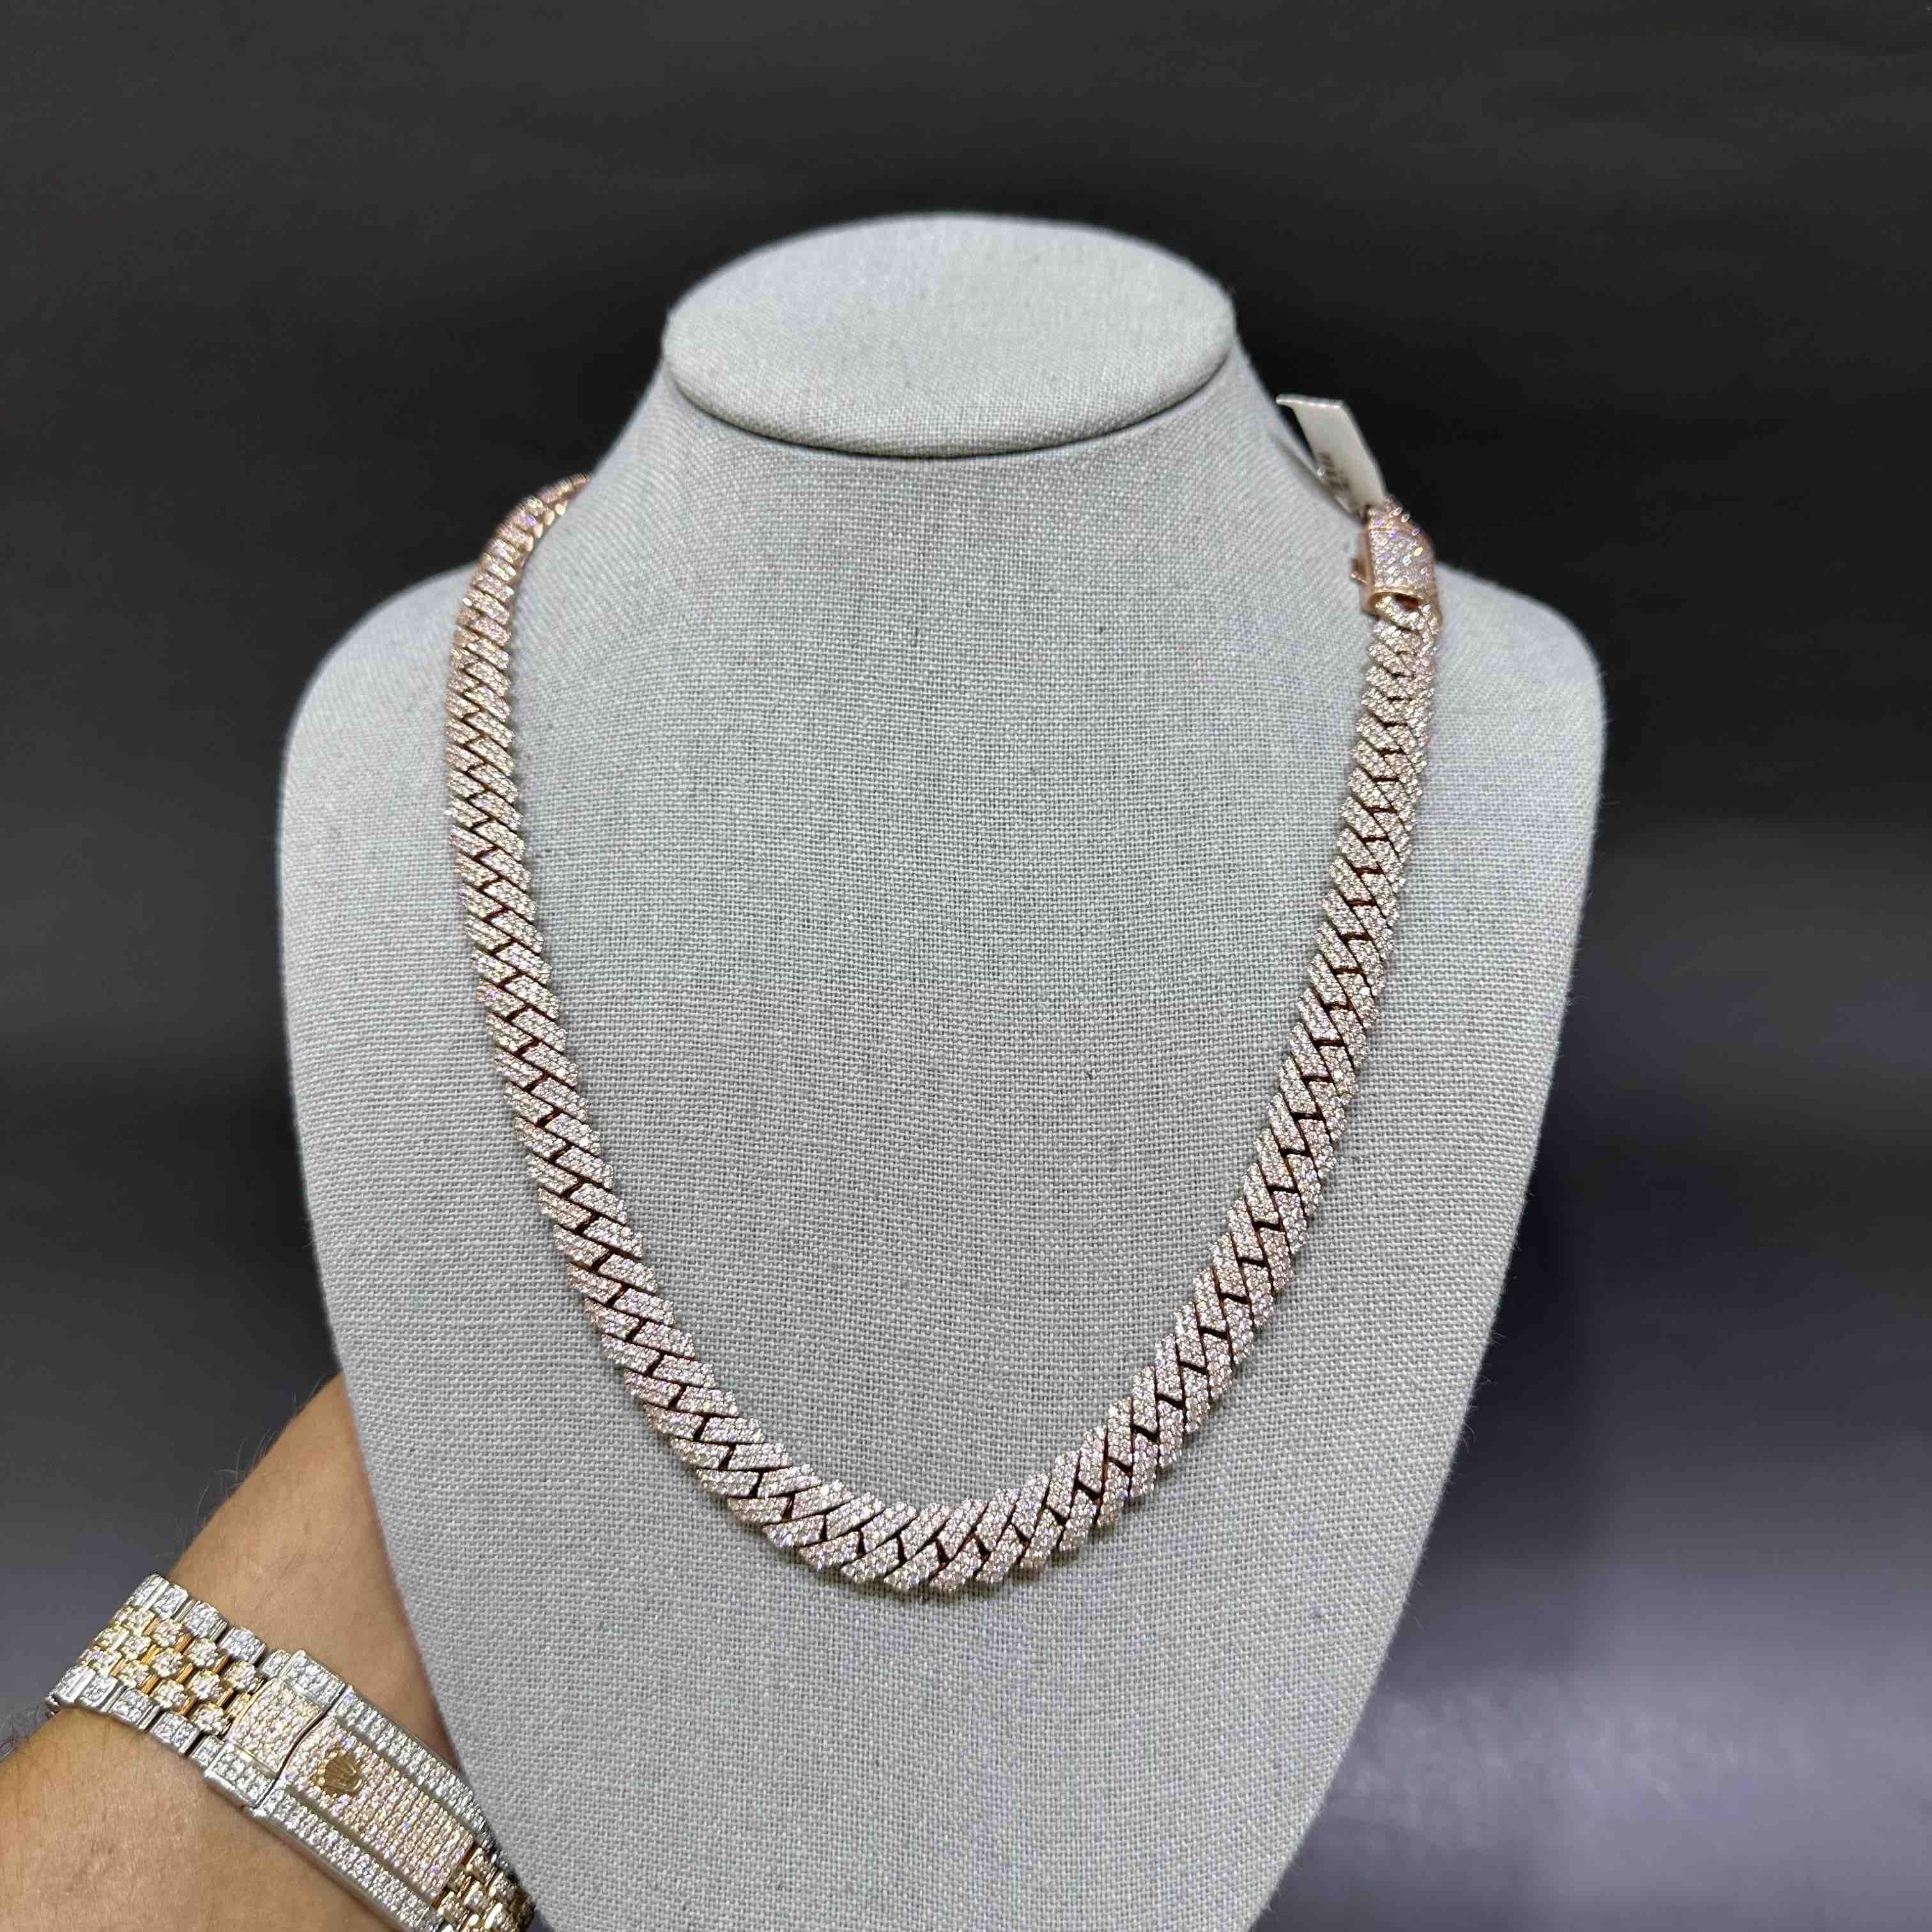 ICED ROSE GOLD MIAMI BUST DOWN full chain